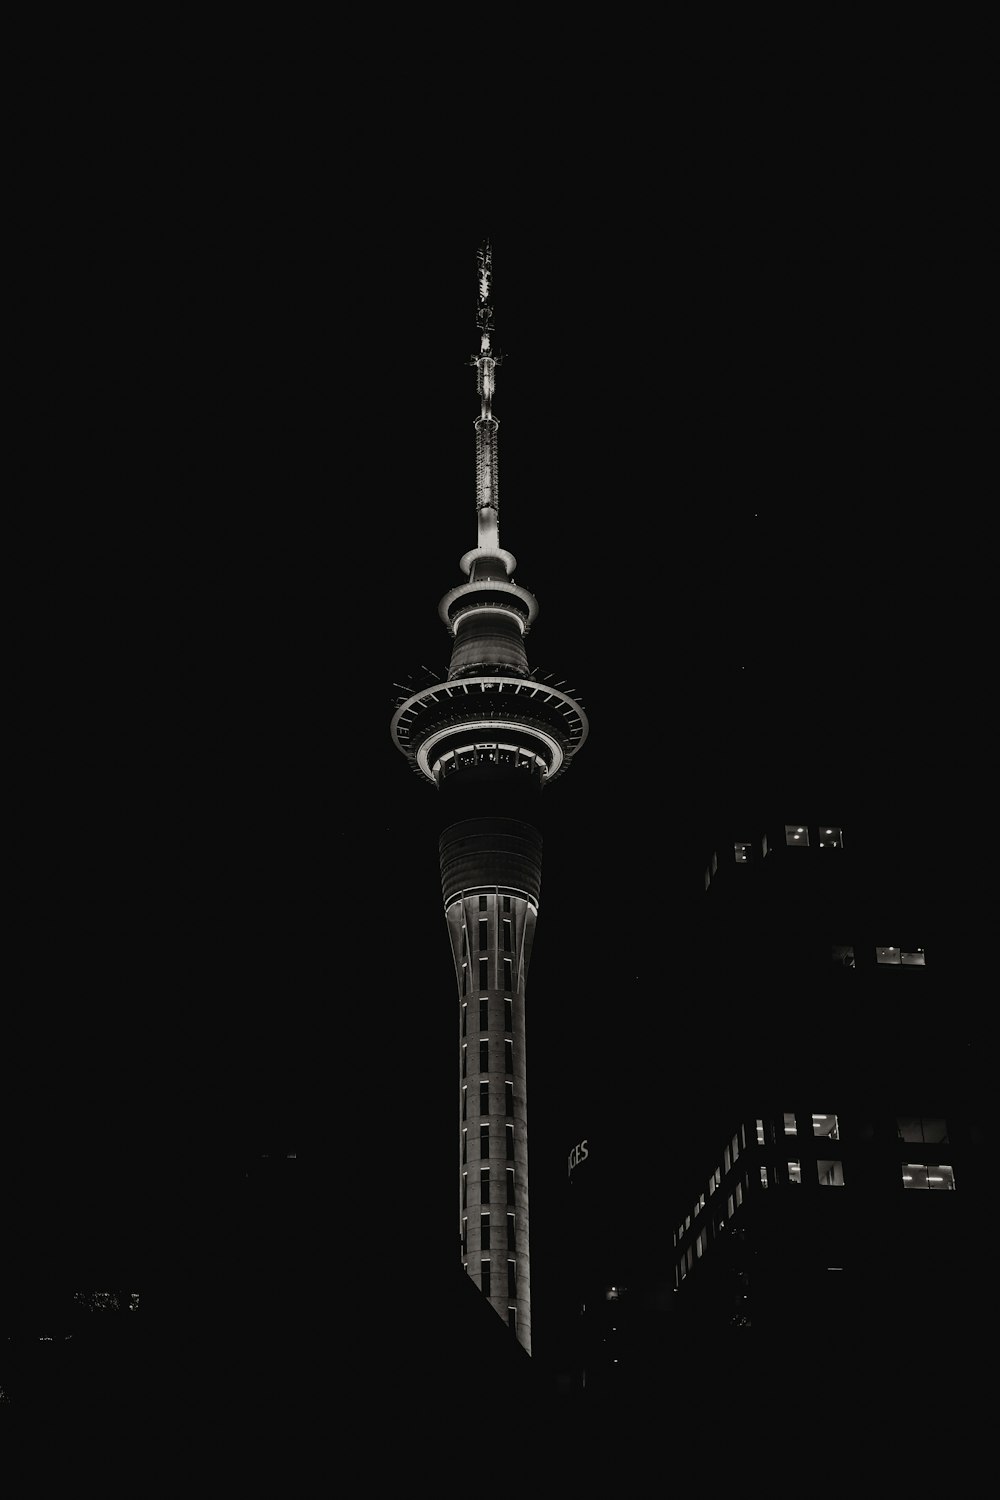 black and white tower during night time